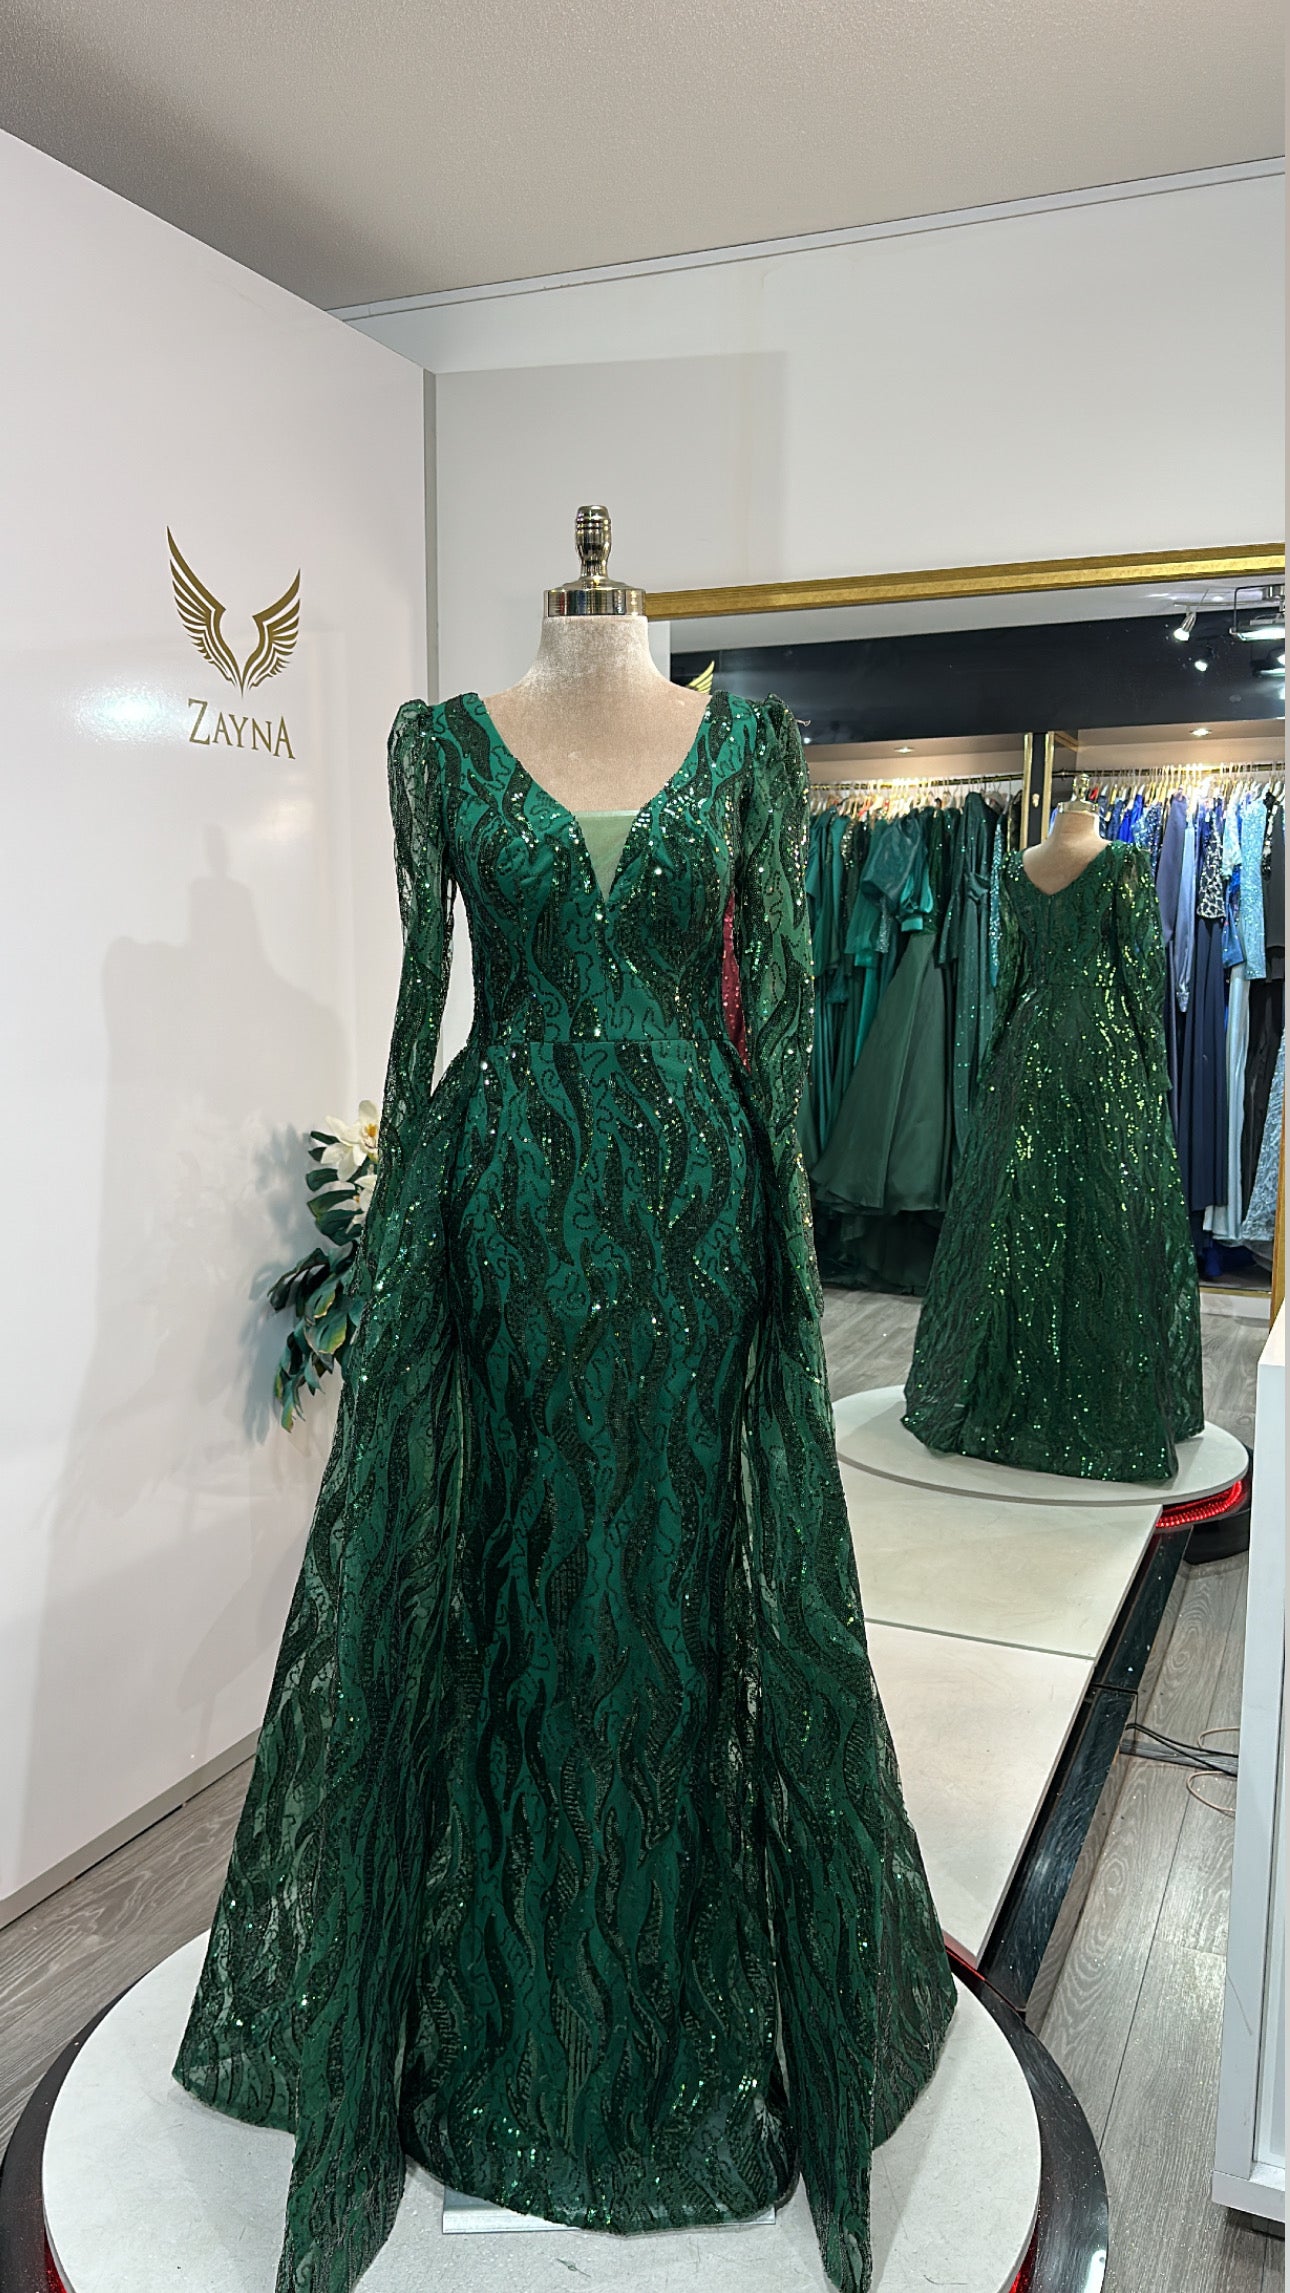 Elegant green dress with glitter and veil